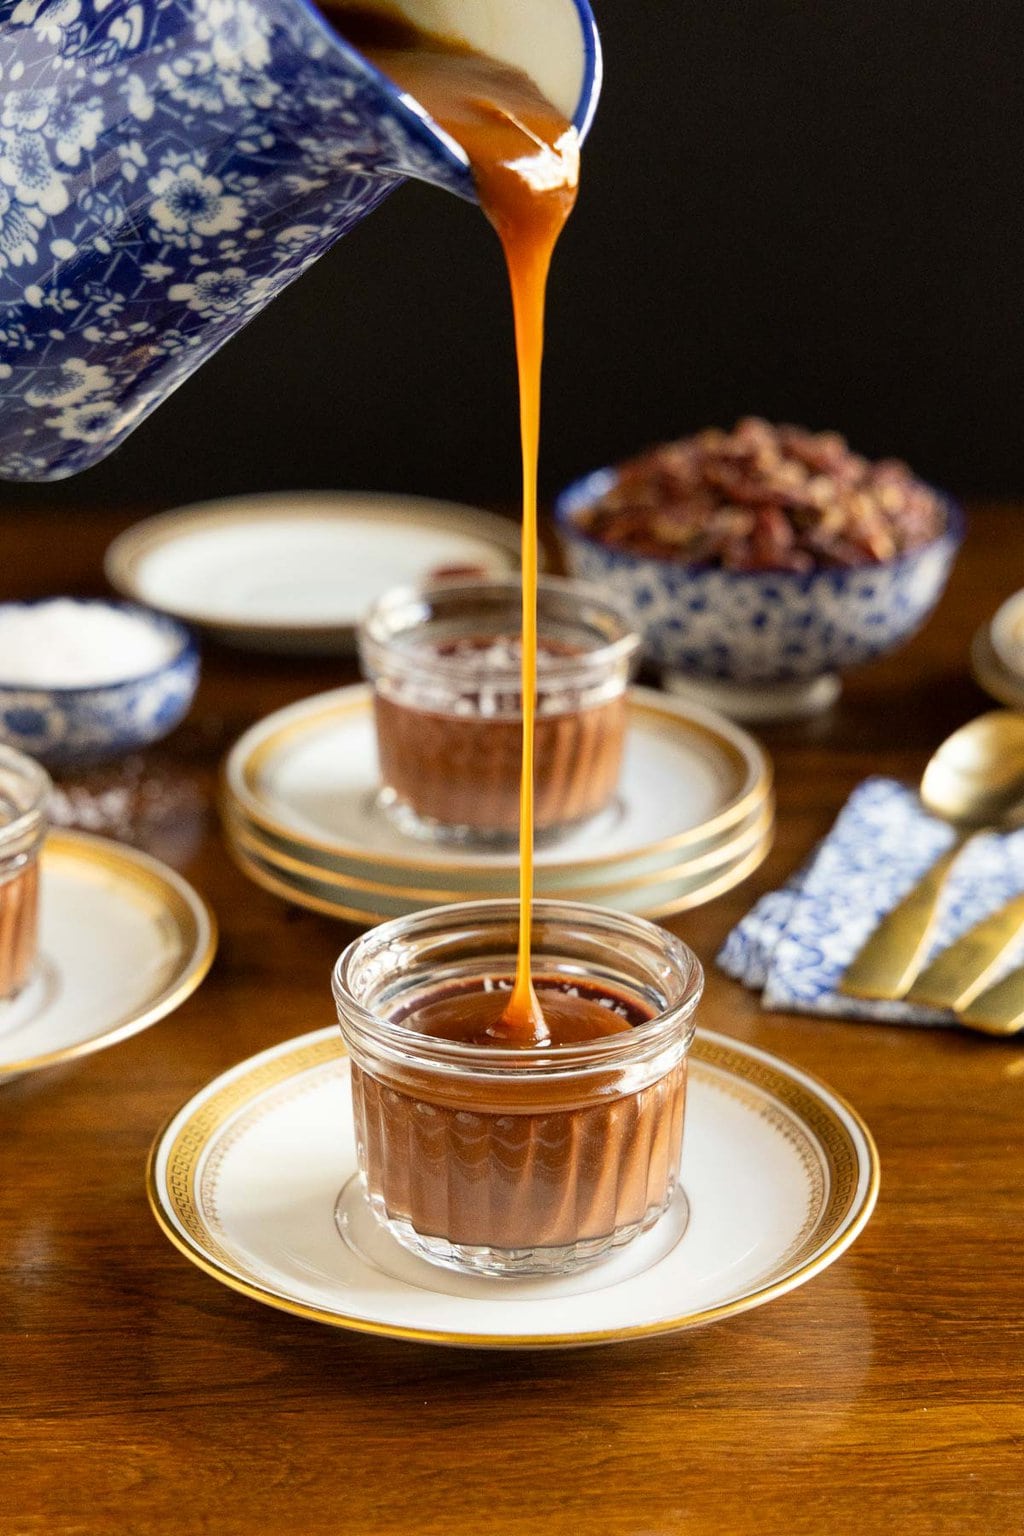 Vertical photo of a pitcher of caramel sauce being poured over a Ridiculously Easy 5 Minute Chocolate Mousse dessert in a glass serving cup.